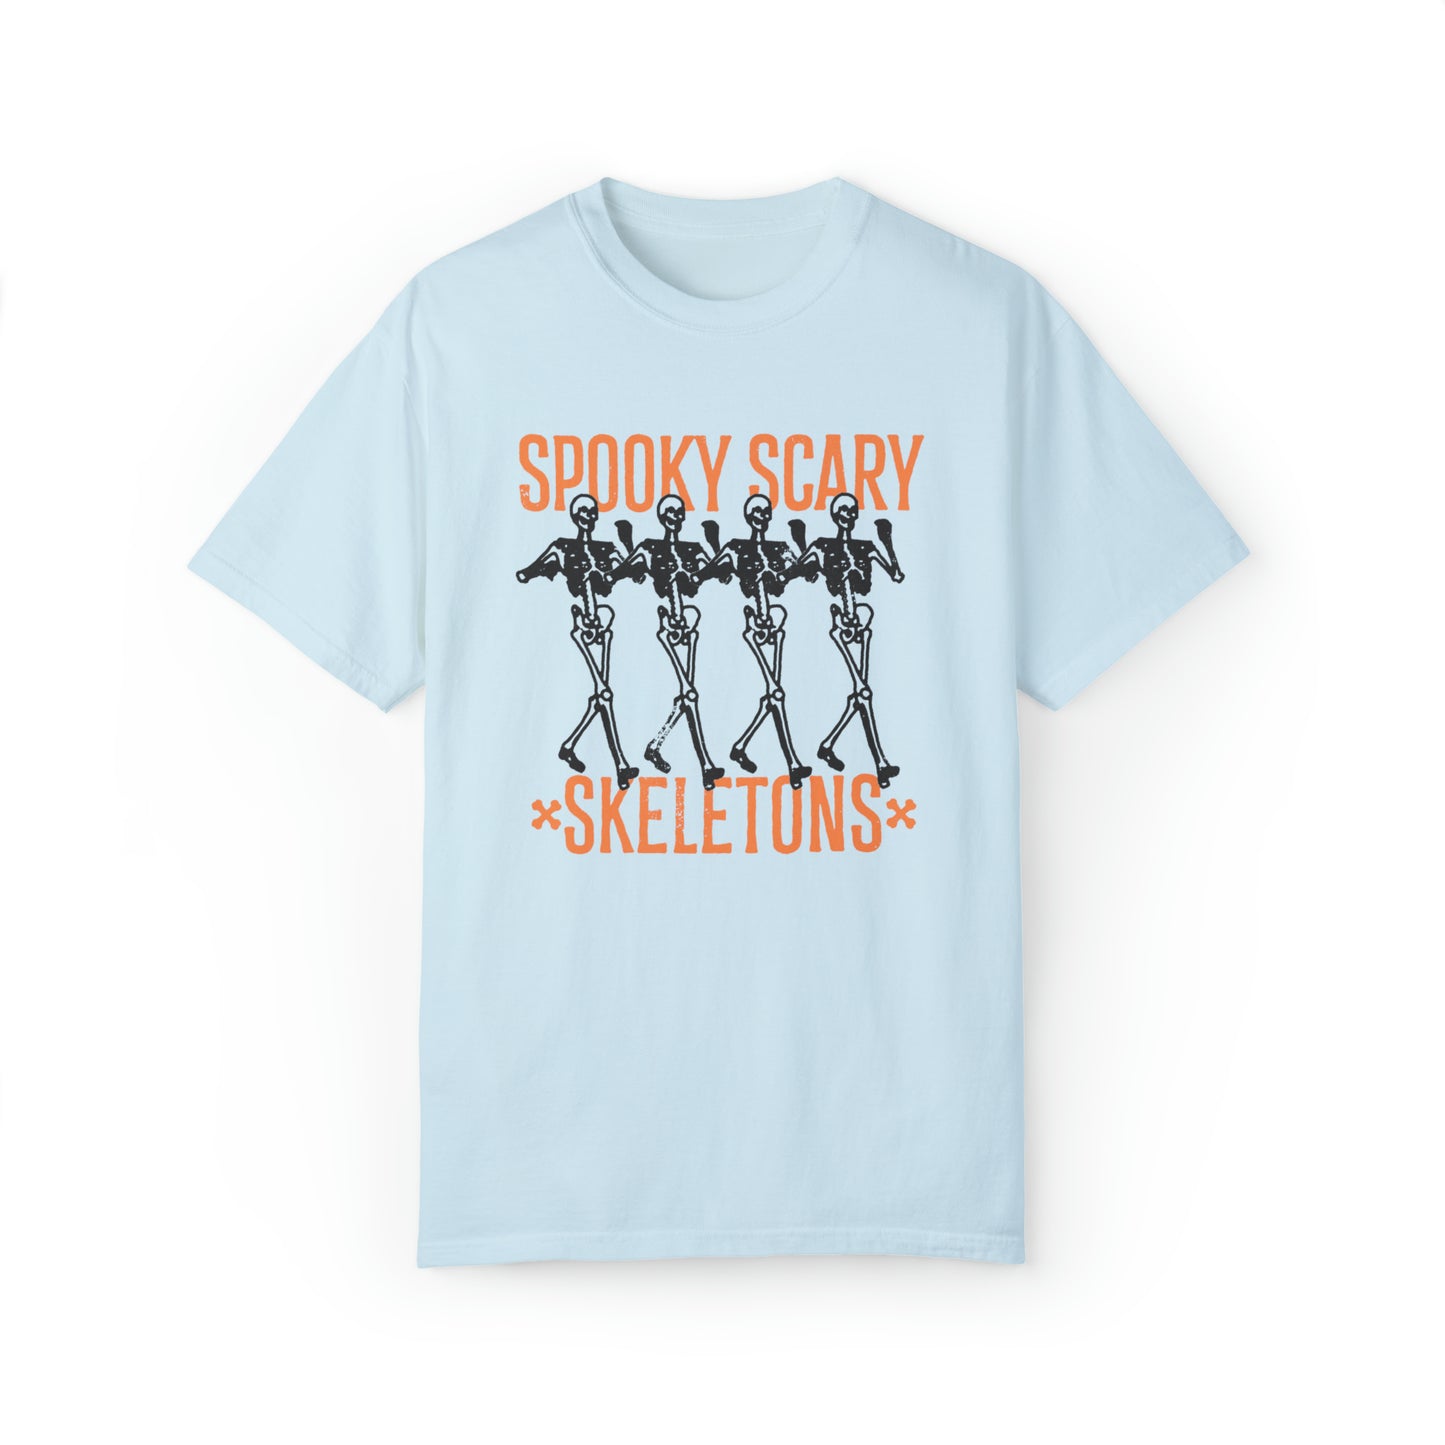 Spooky Scary Skeletons Comfort Colors Unisex Garment-Dyed T-shirt